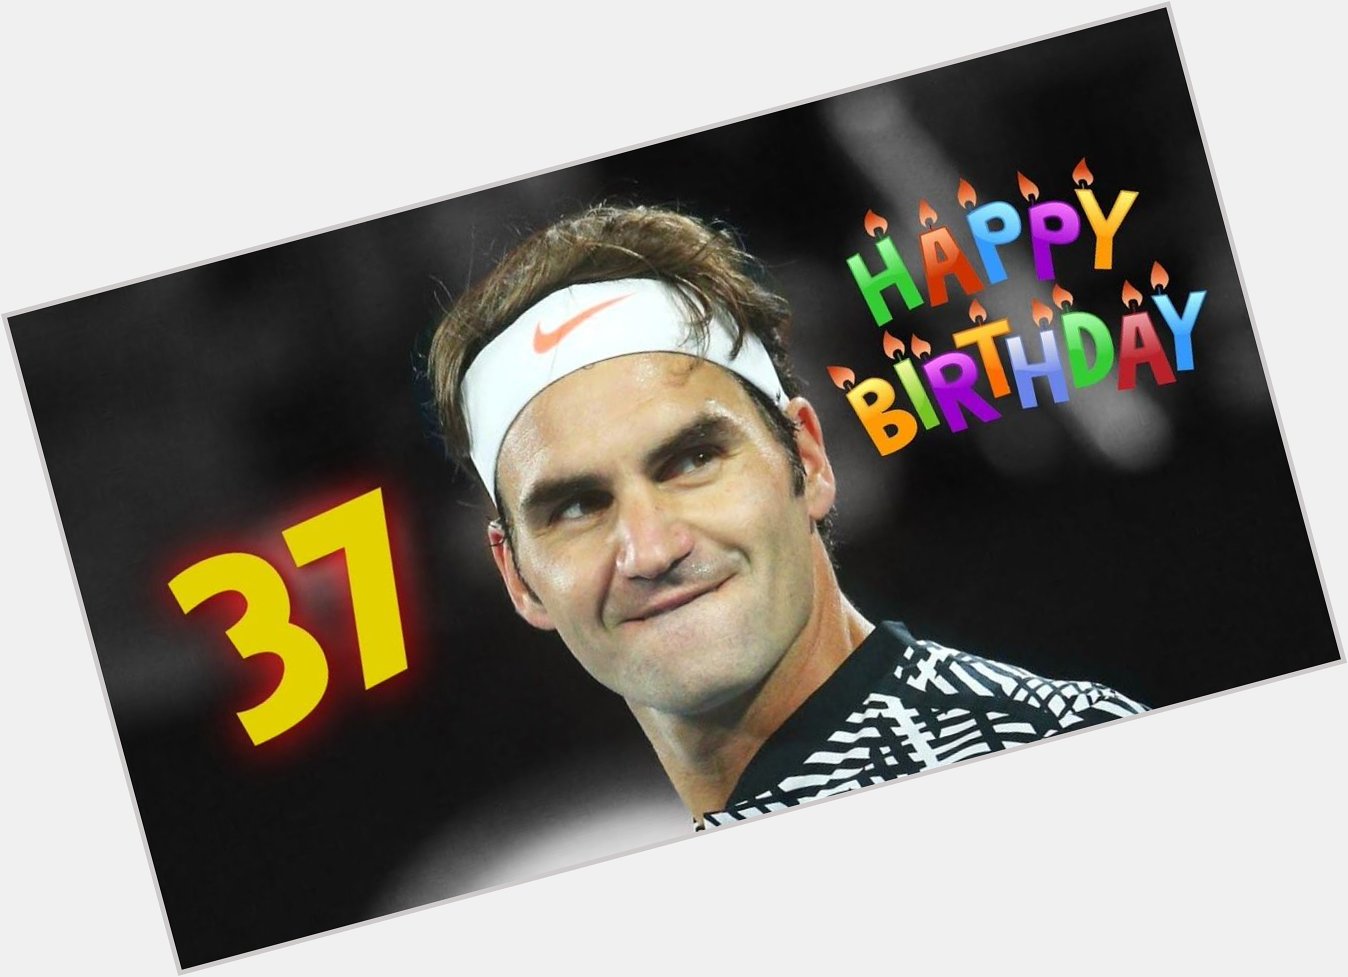 37 Points IMPOSSIBLE to forget from Roger Federer Happy Birthday!  (via 